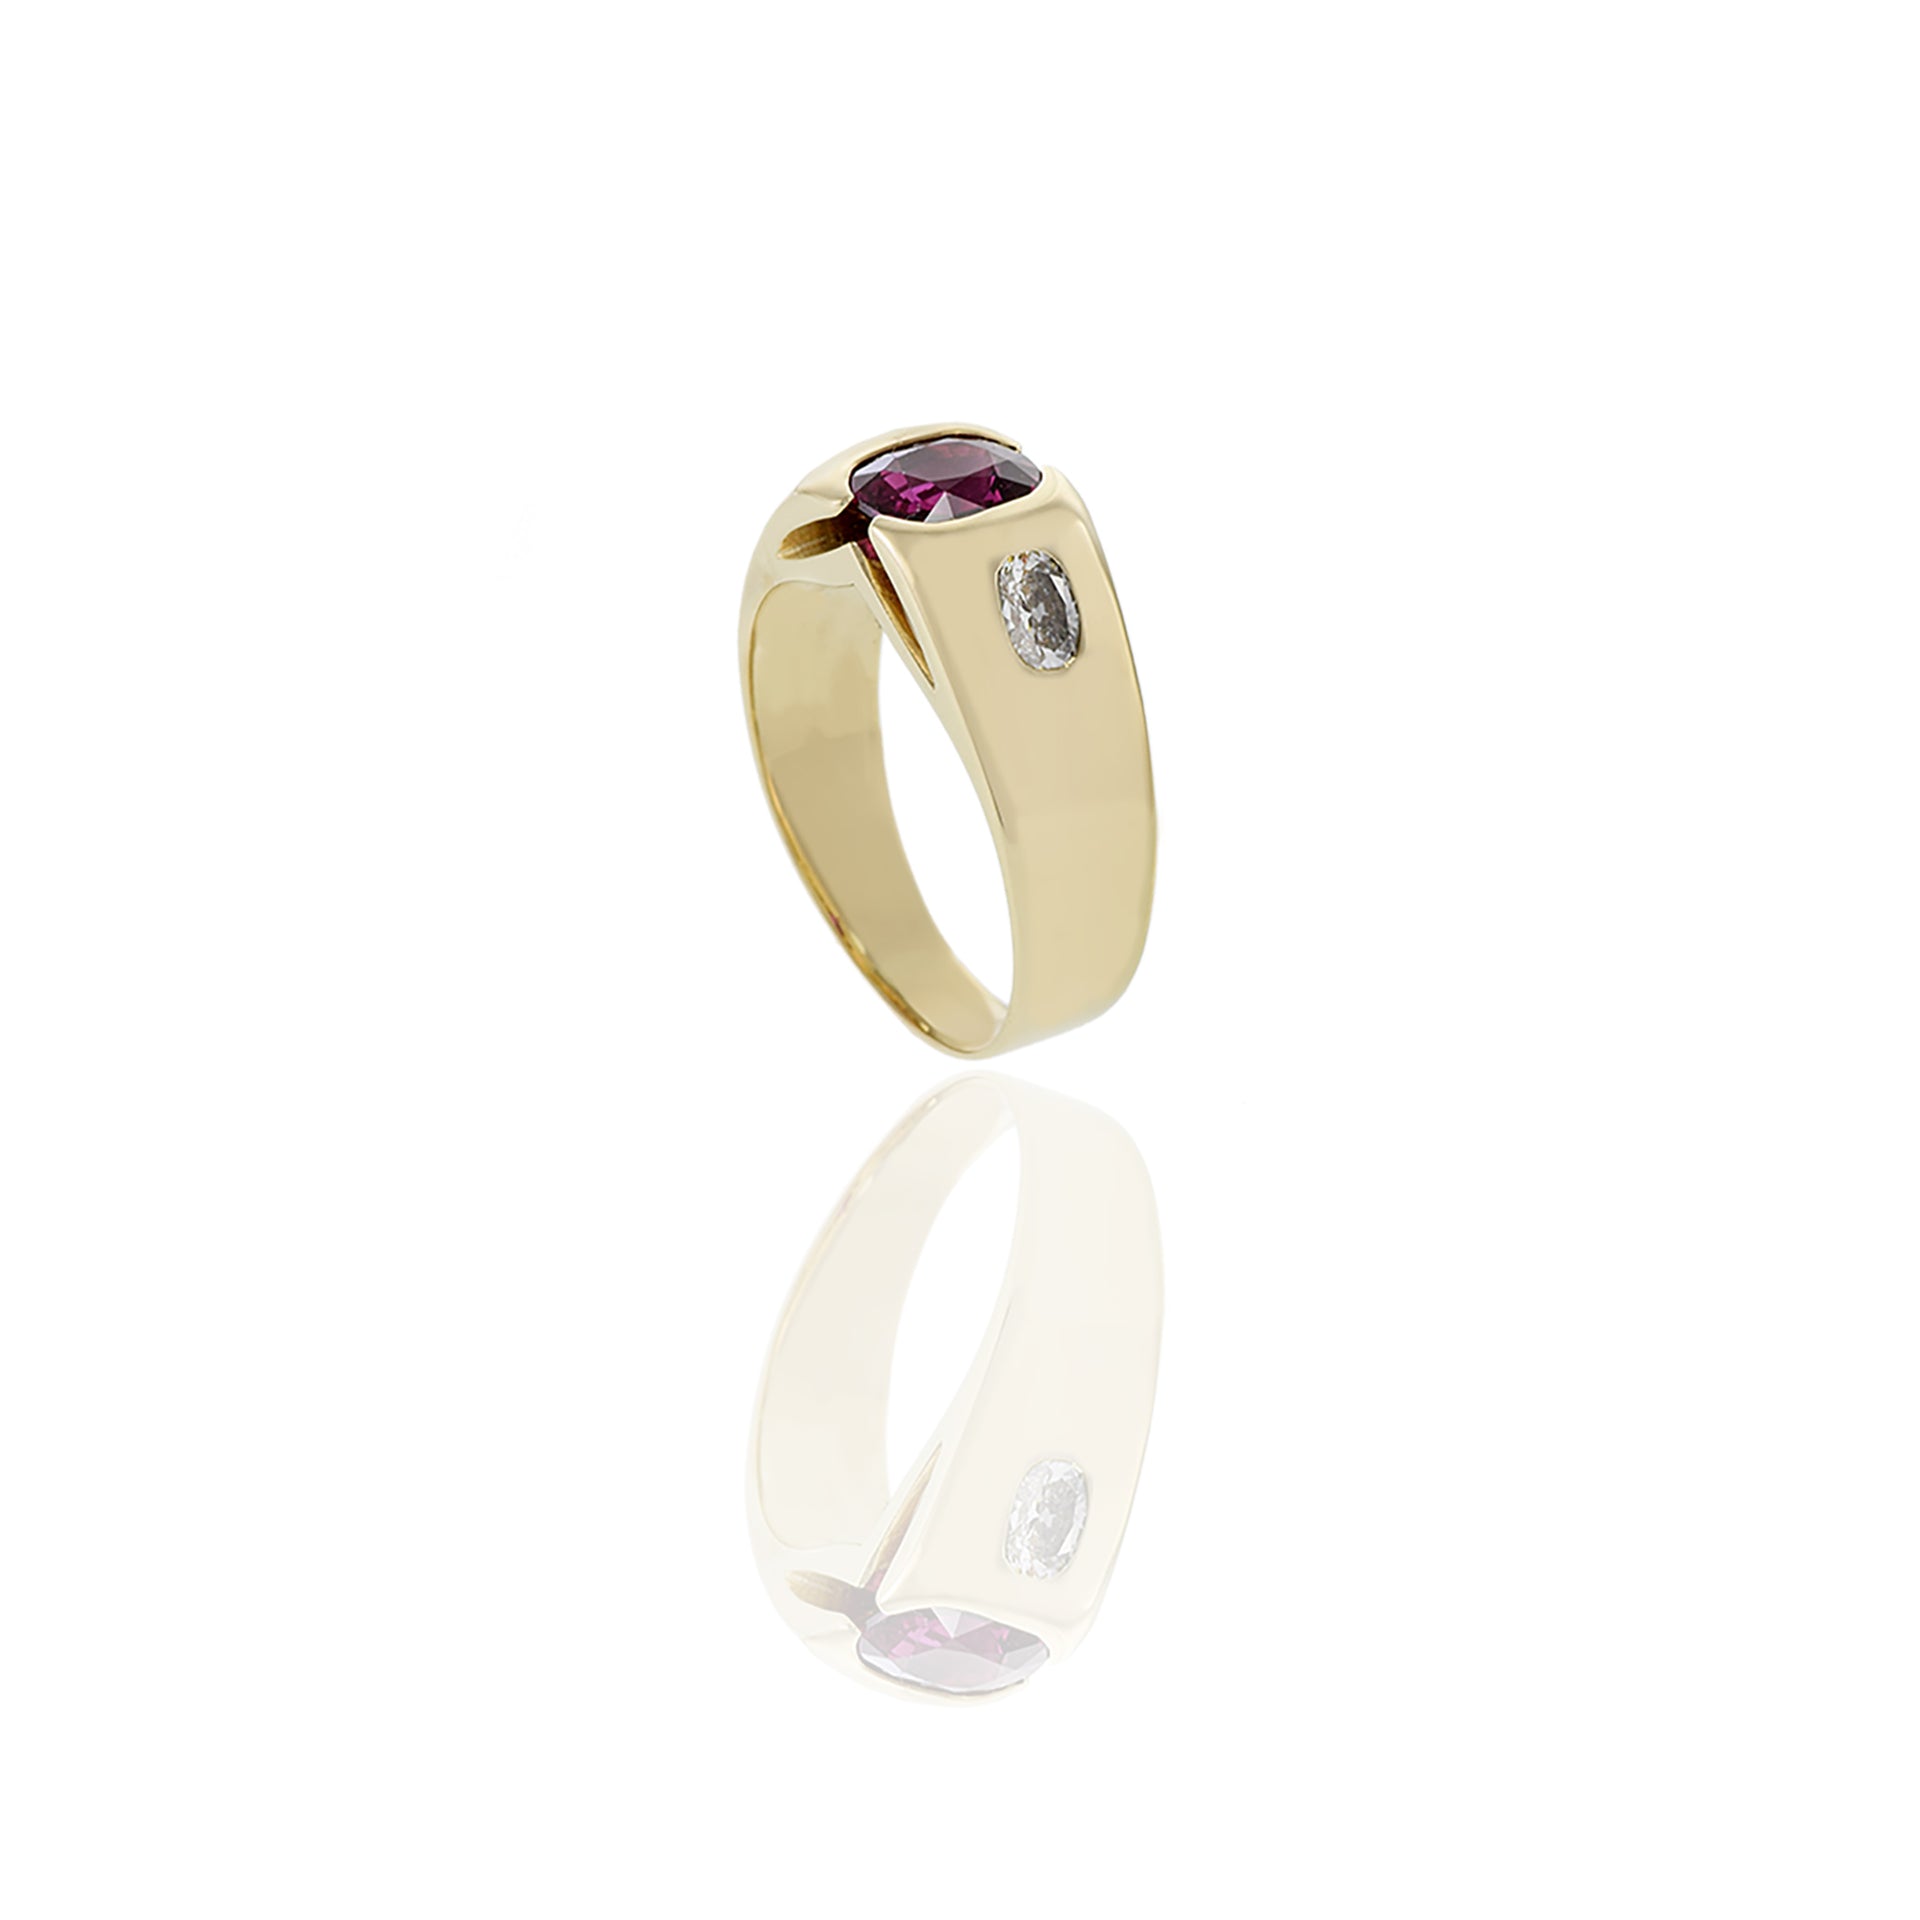 Estate 14KT Yellow Gold Ruby And Diamond Ring